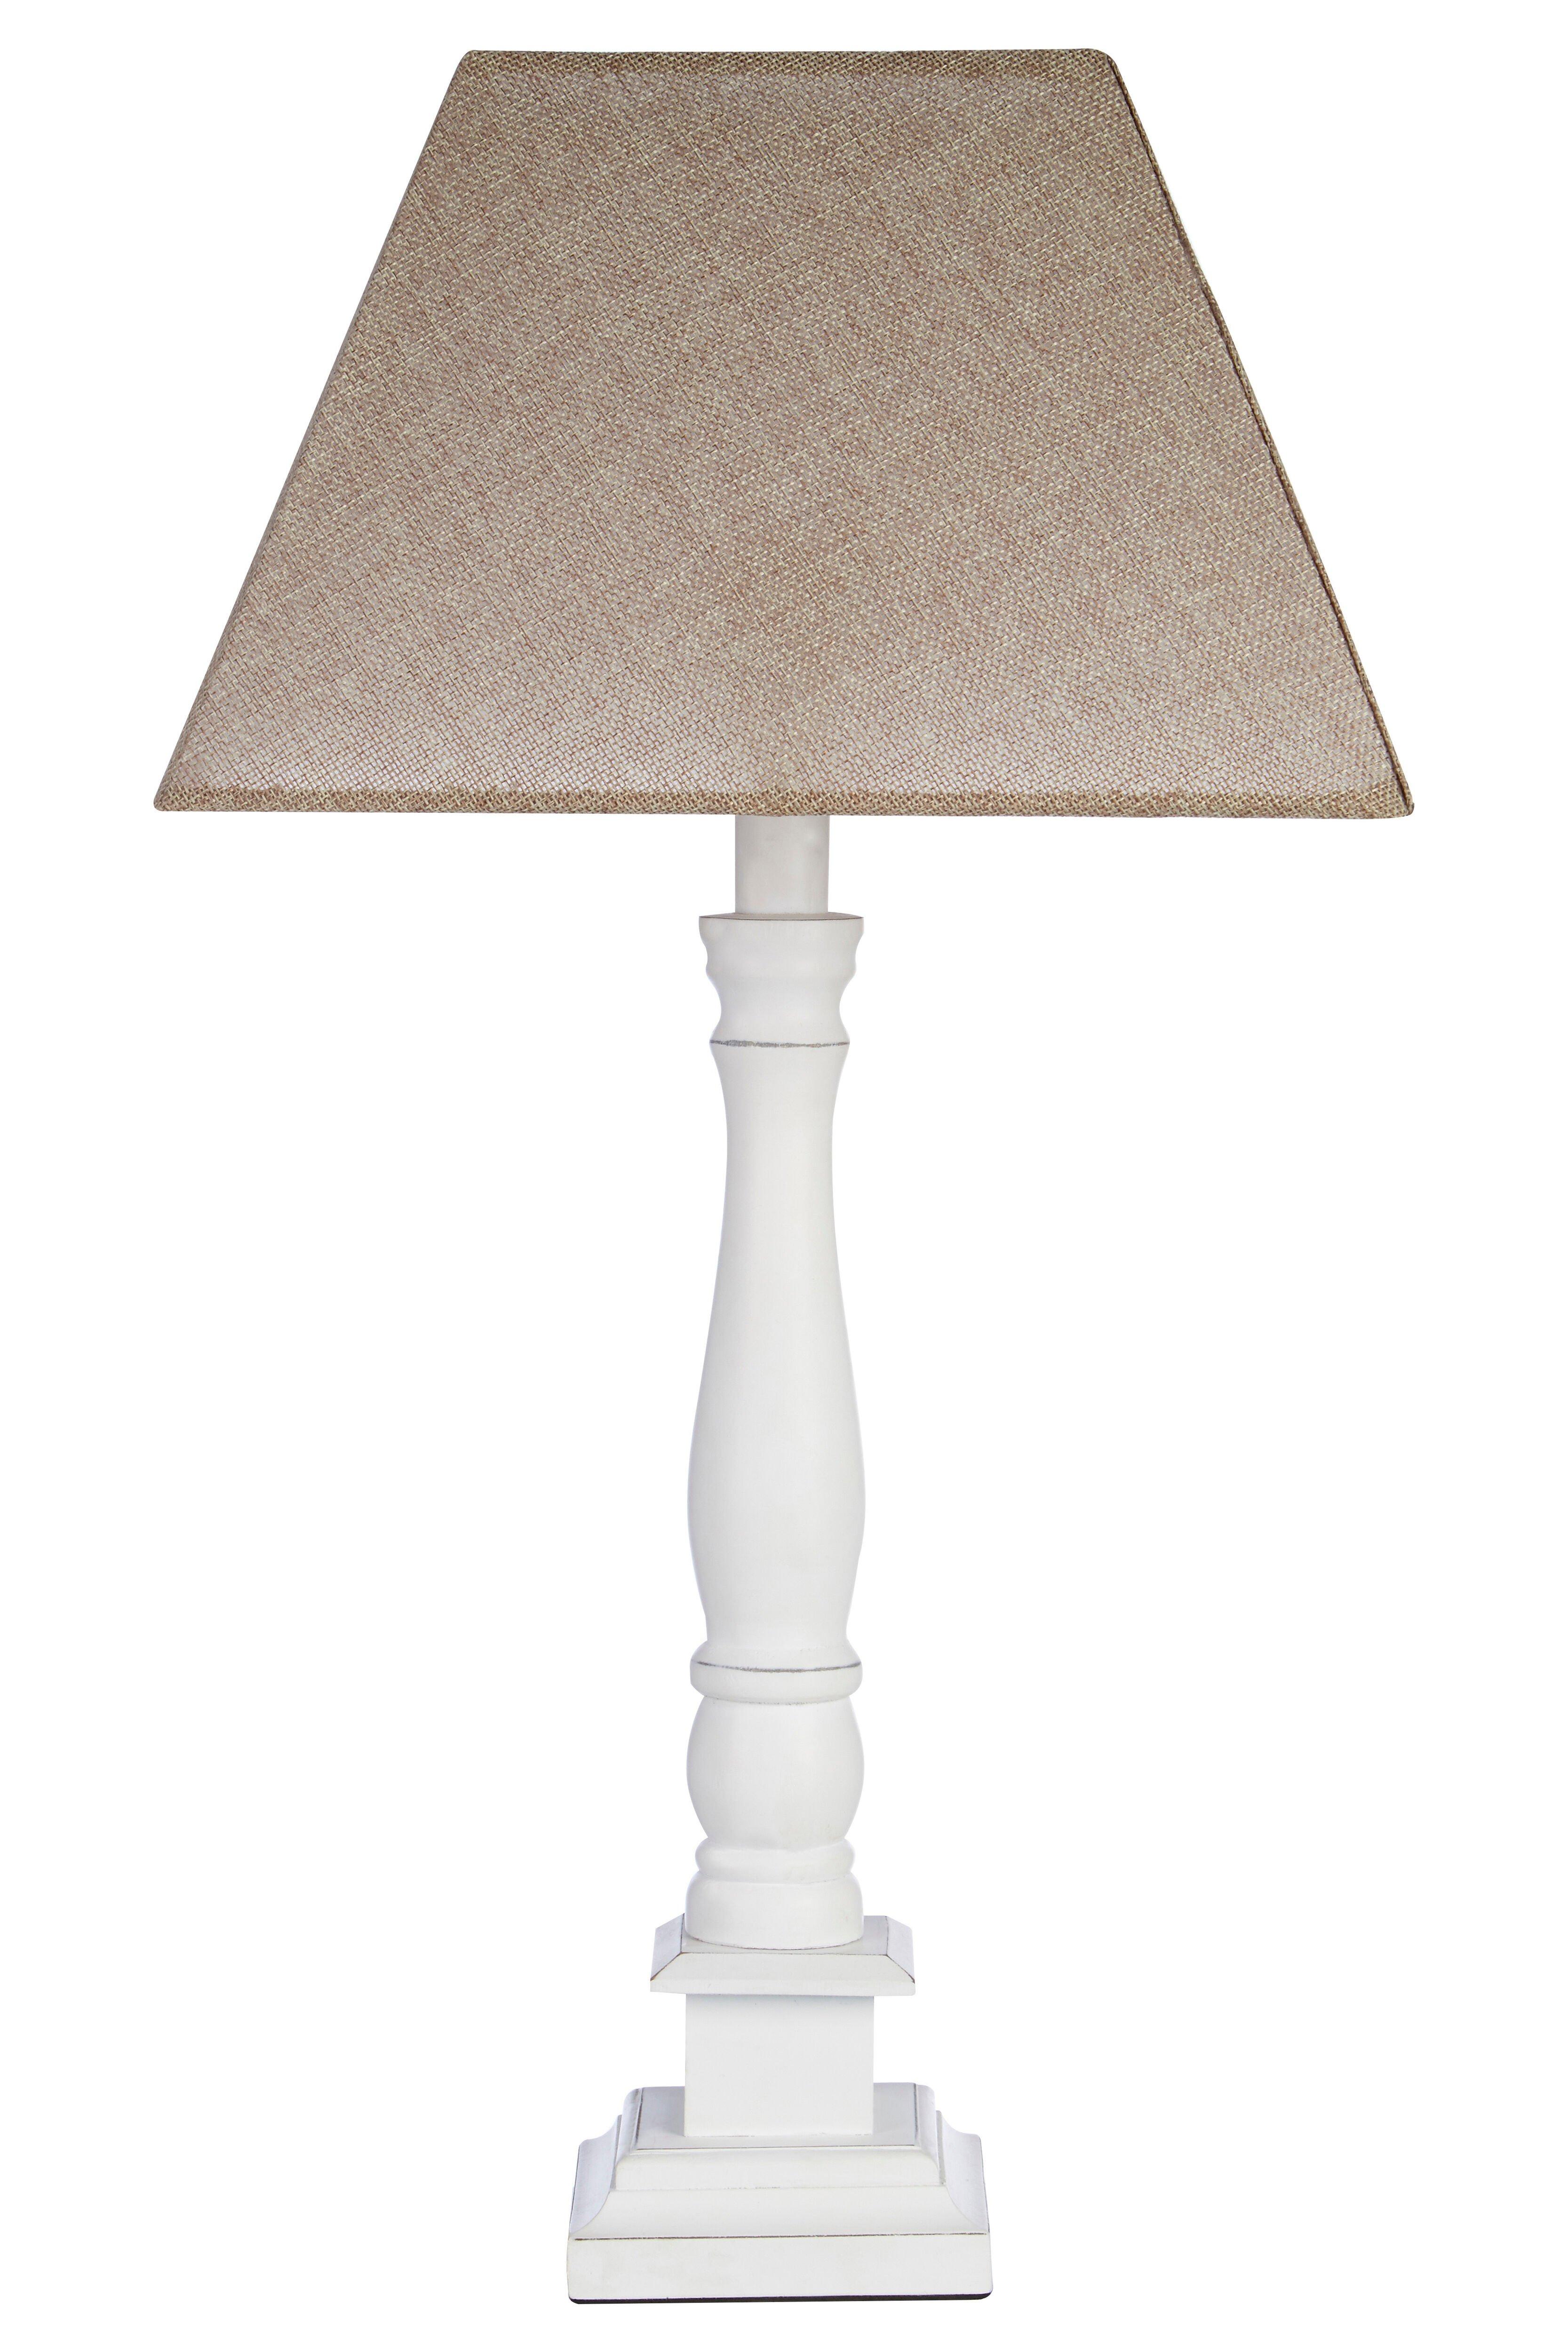 Interiors by Premier Maine Table Lamp with EU Plug